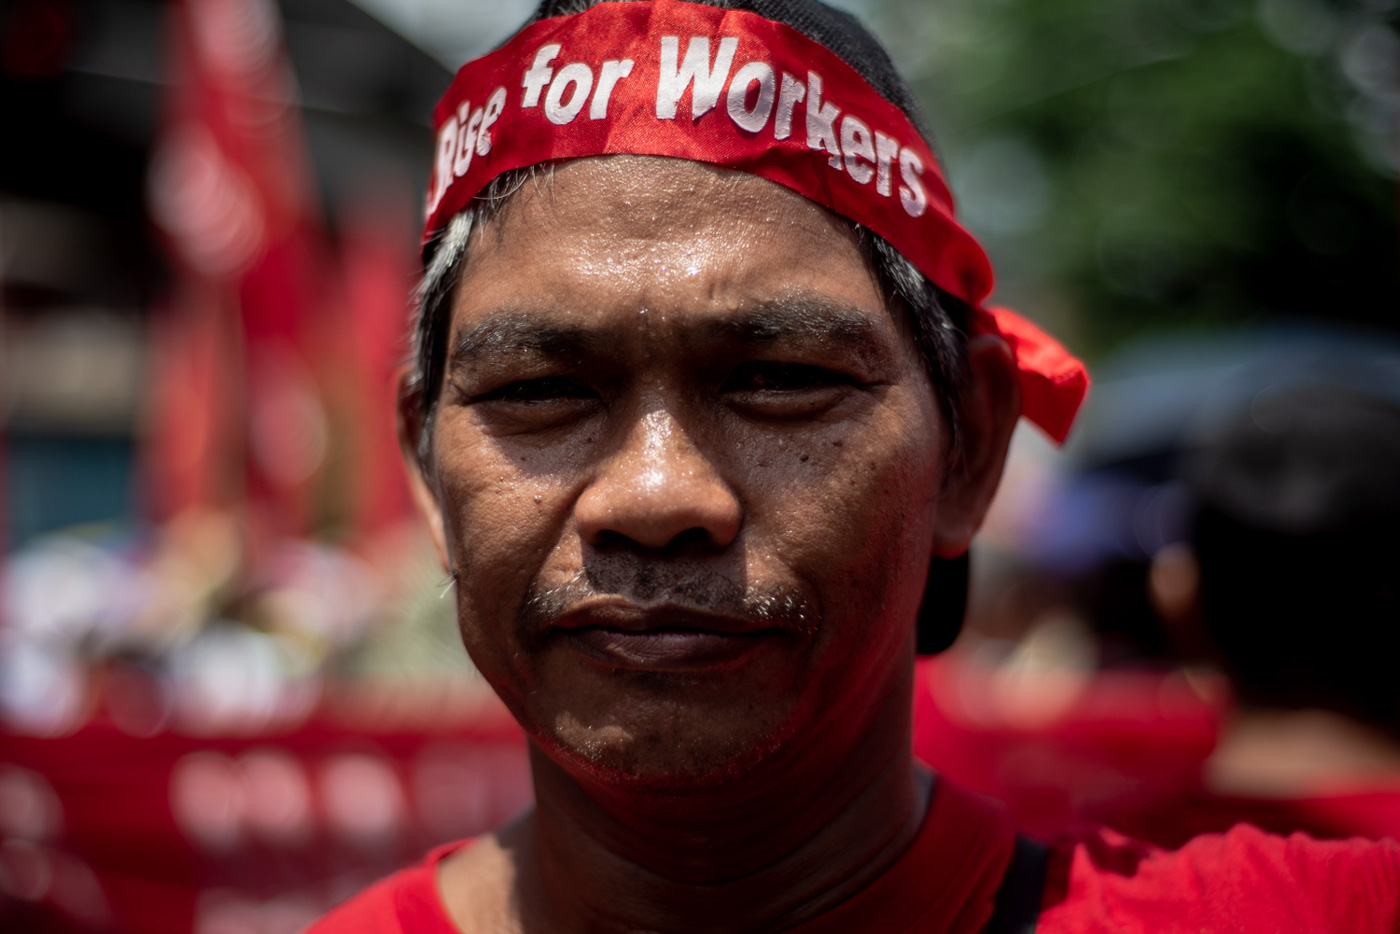 CONTRACTUAL. Leonel Adrales, 52, joins thousands at the Labor Day rally in Mendiola, Manila, on Tuesday, May 1, 2018, to call for an end to contractualization. He has been a contractual worker for decades. Photo by Eloisa Lopez/Rappler 